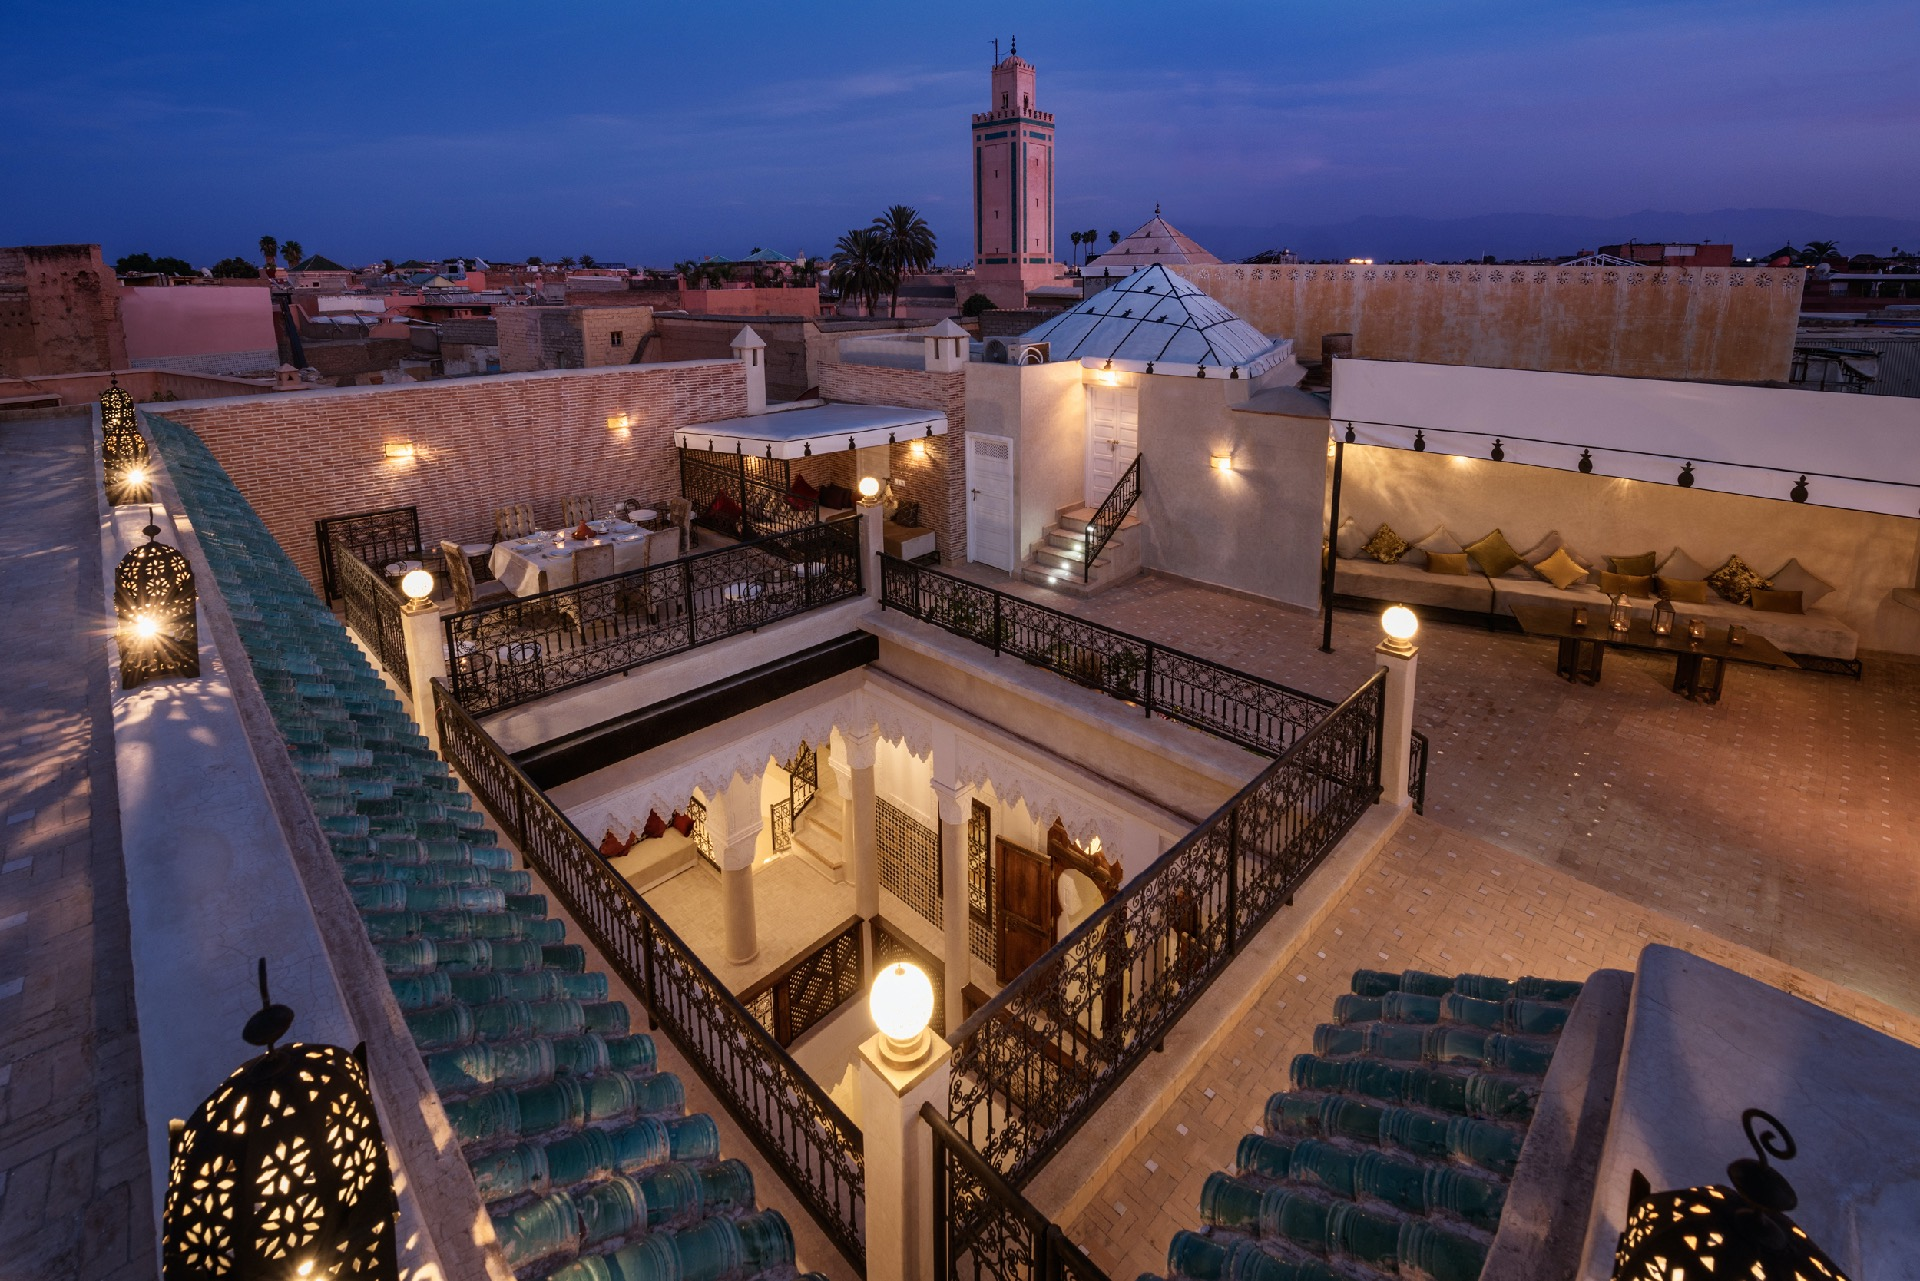 Riad Spice roof terrace at night